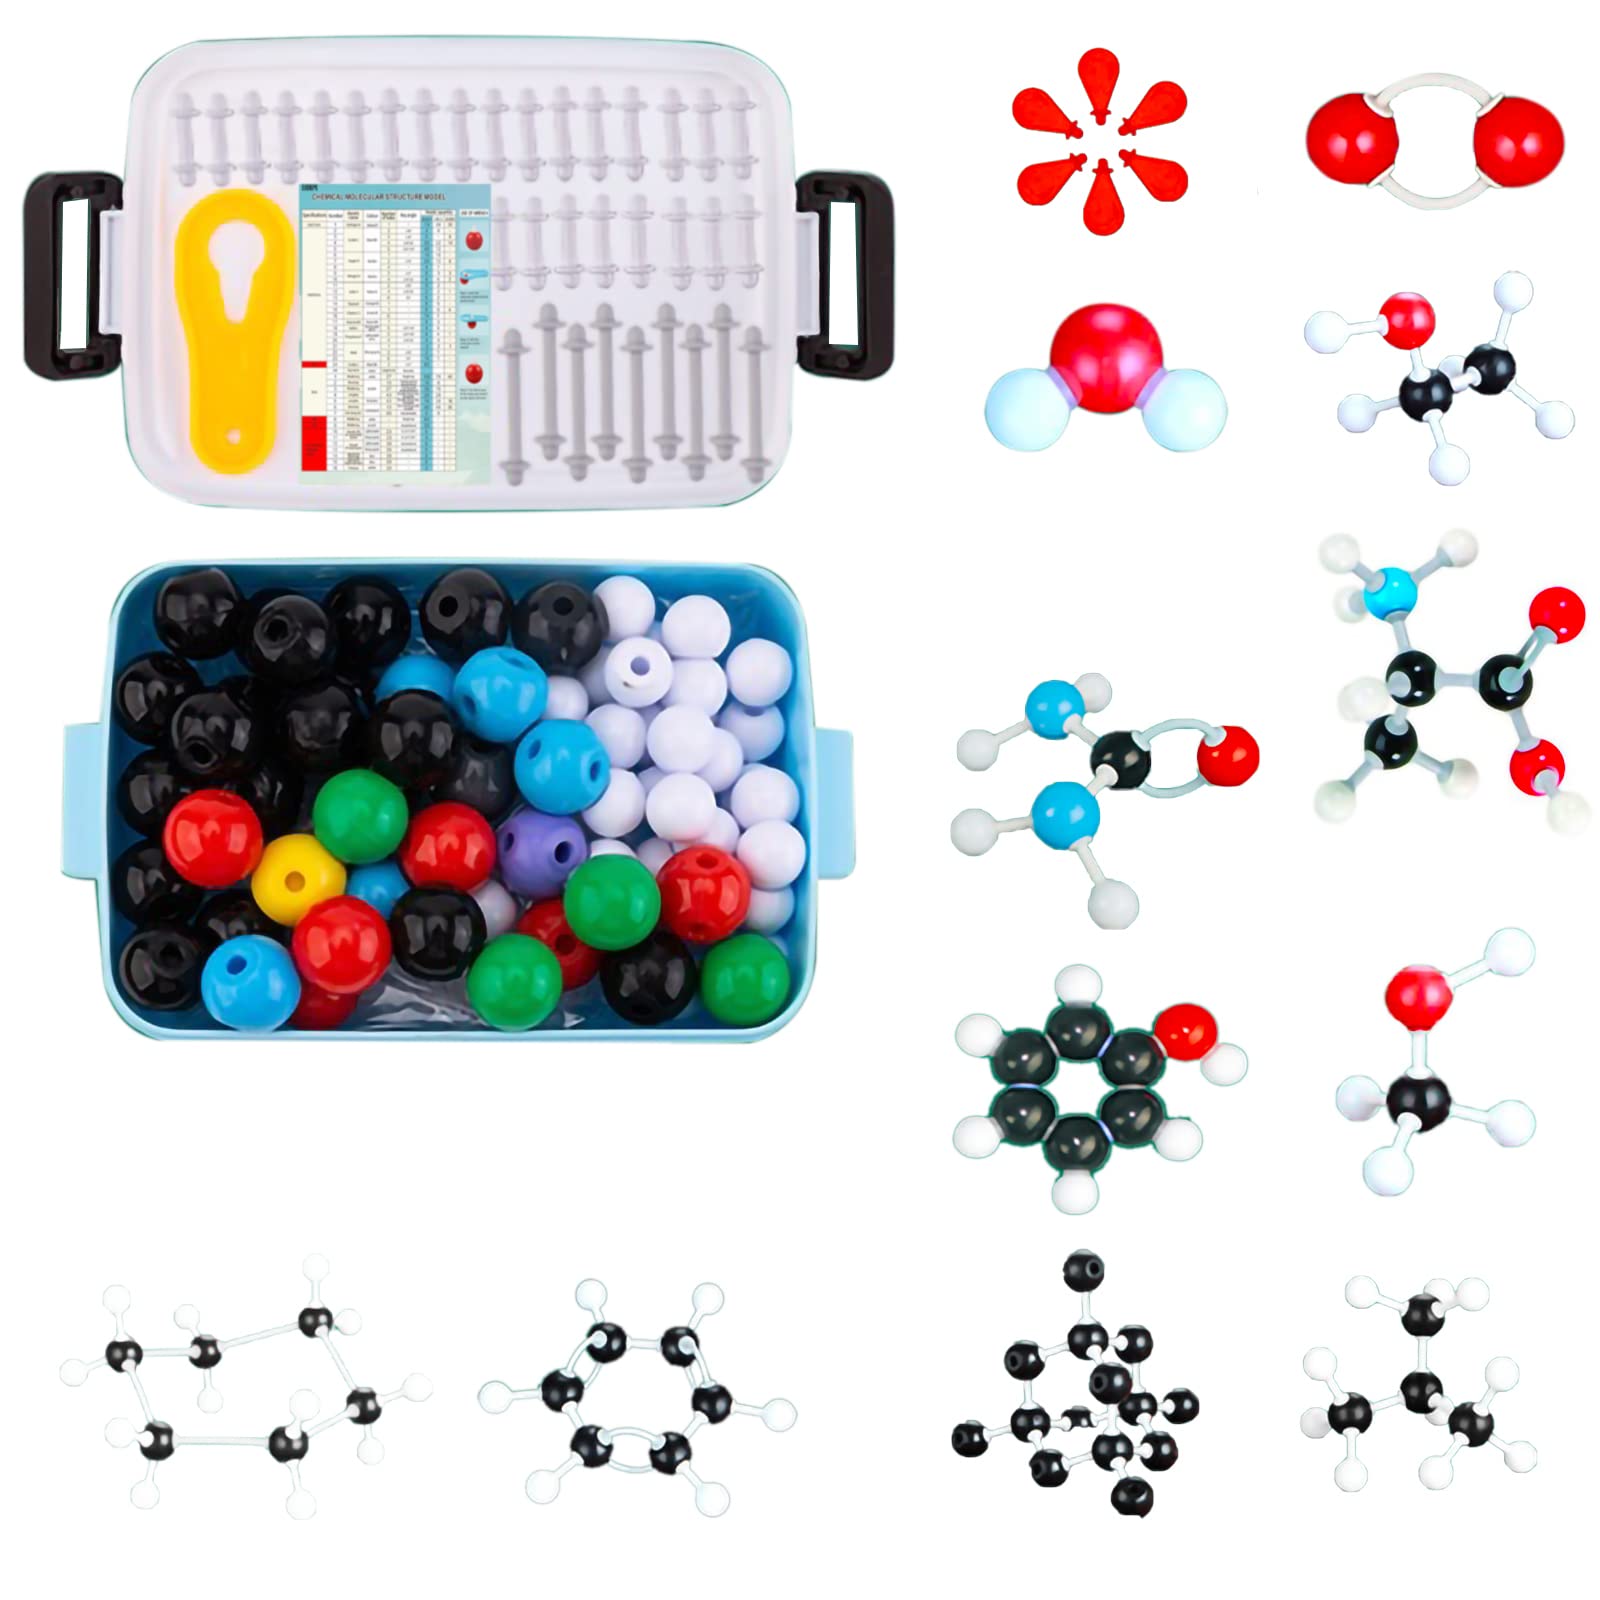 EXBEPE Organic Chemistry Molecular Model Kit 206pc Middle,High school Supplies, Educational Science Set Gift for Student to Learn Structure and Reactions